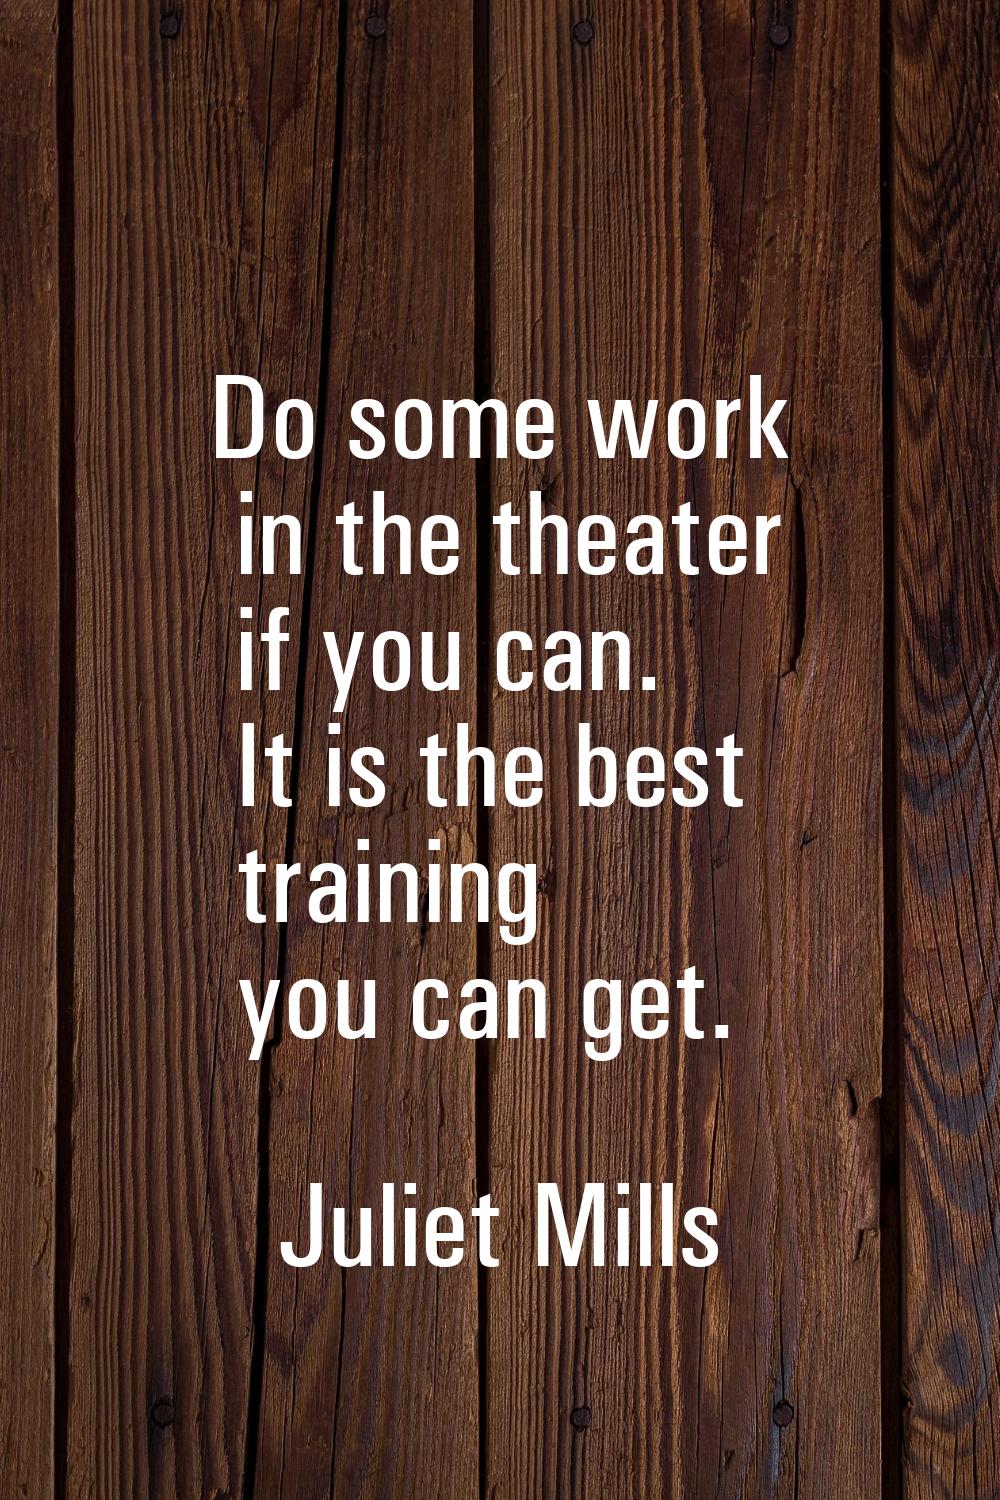 Do some work in the theater if you can. It is the best training you can get.